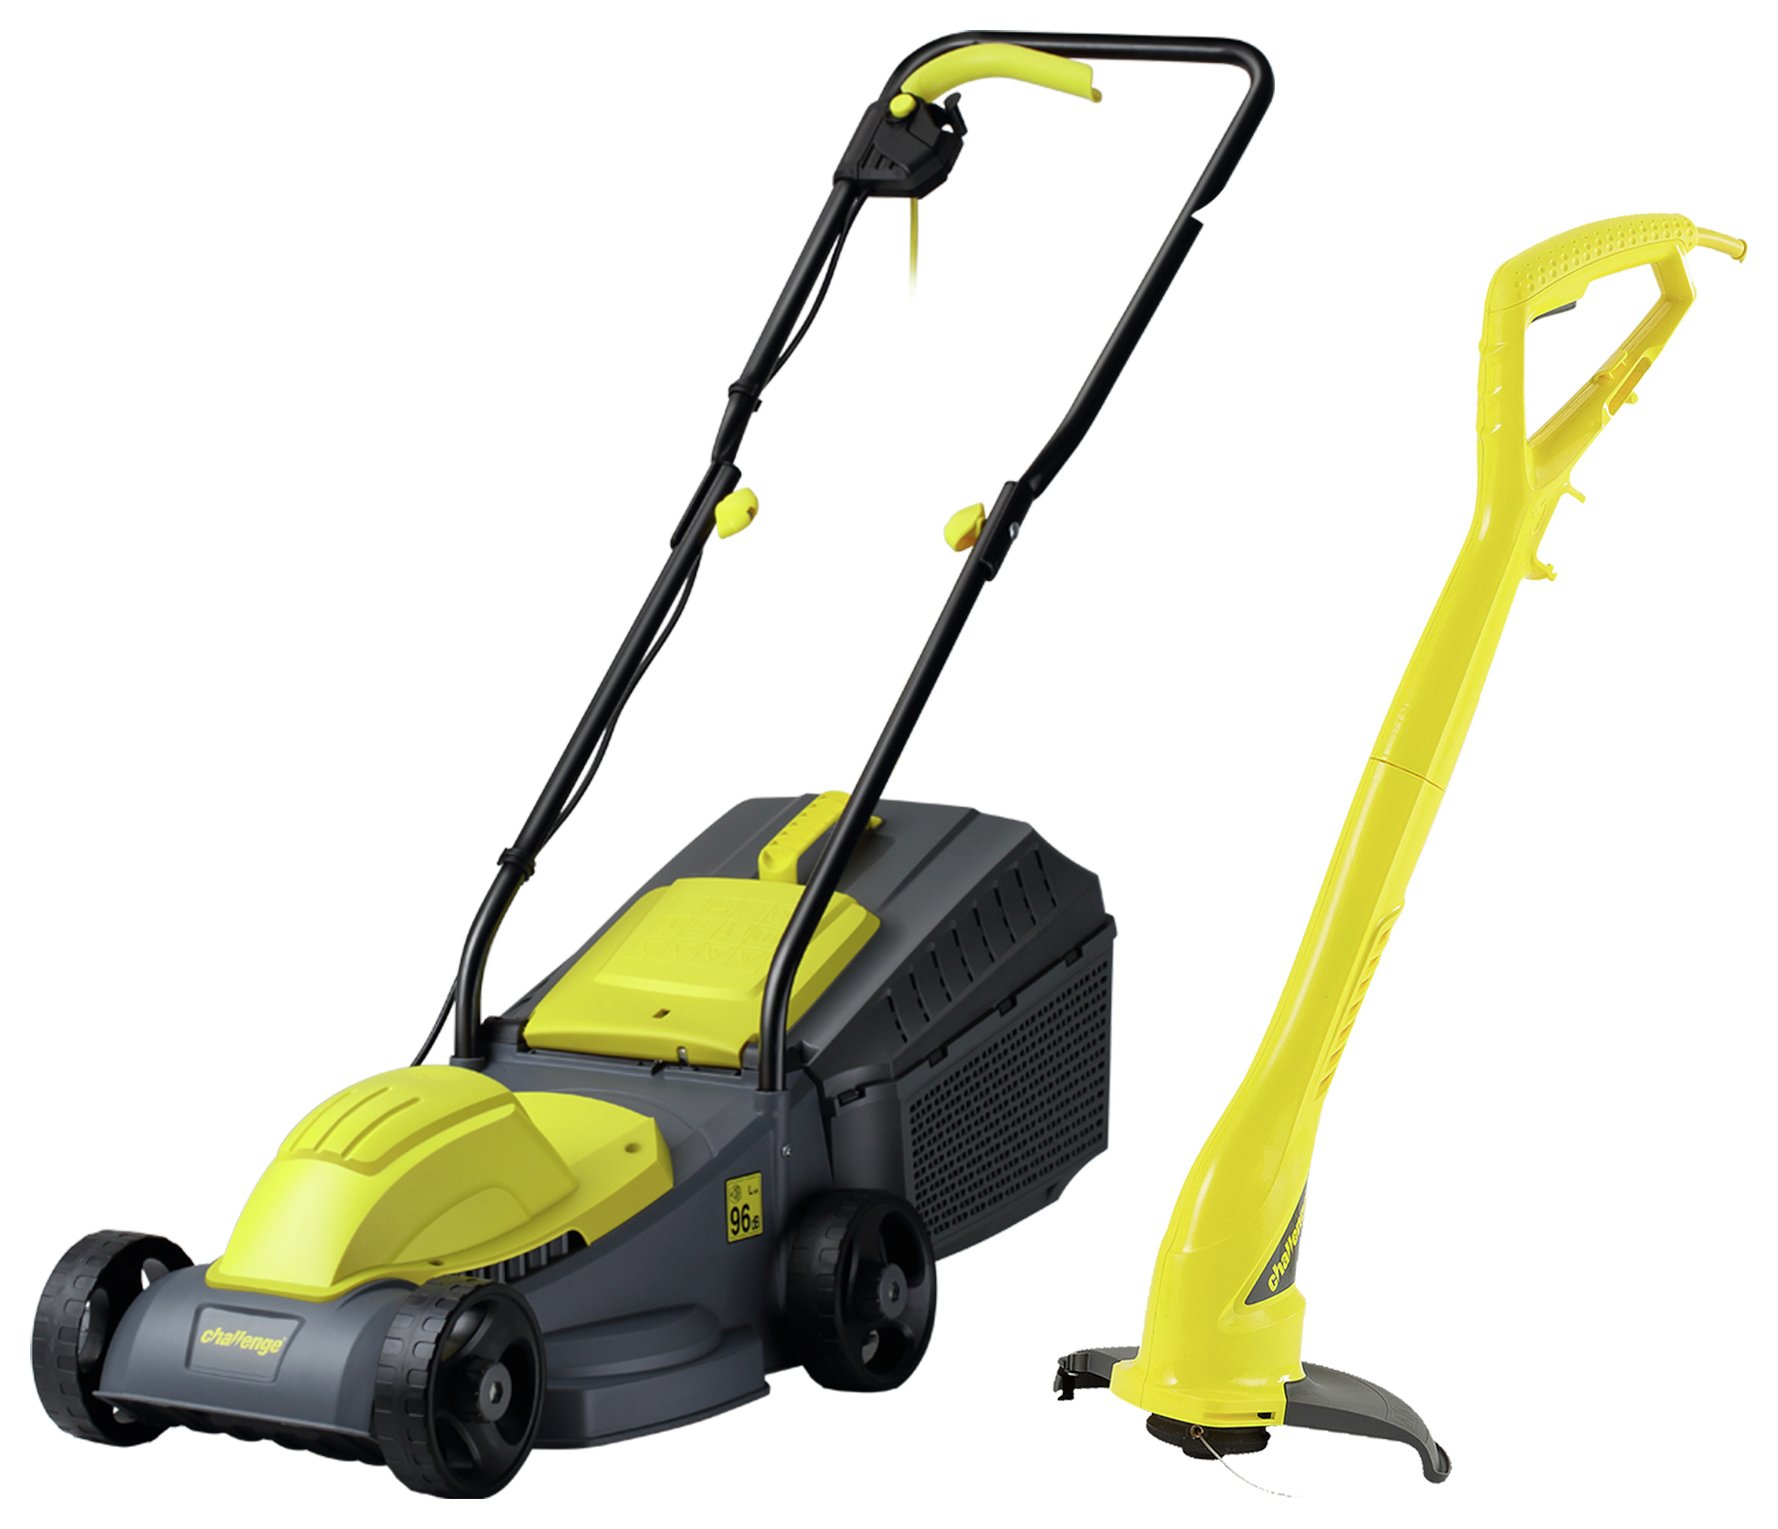 Challenge 31cm Corded Rotary Lawnmower 1000W + Trimmer 250W Review